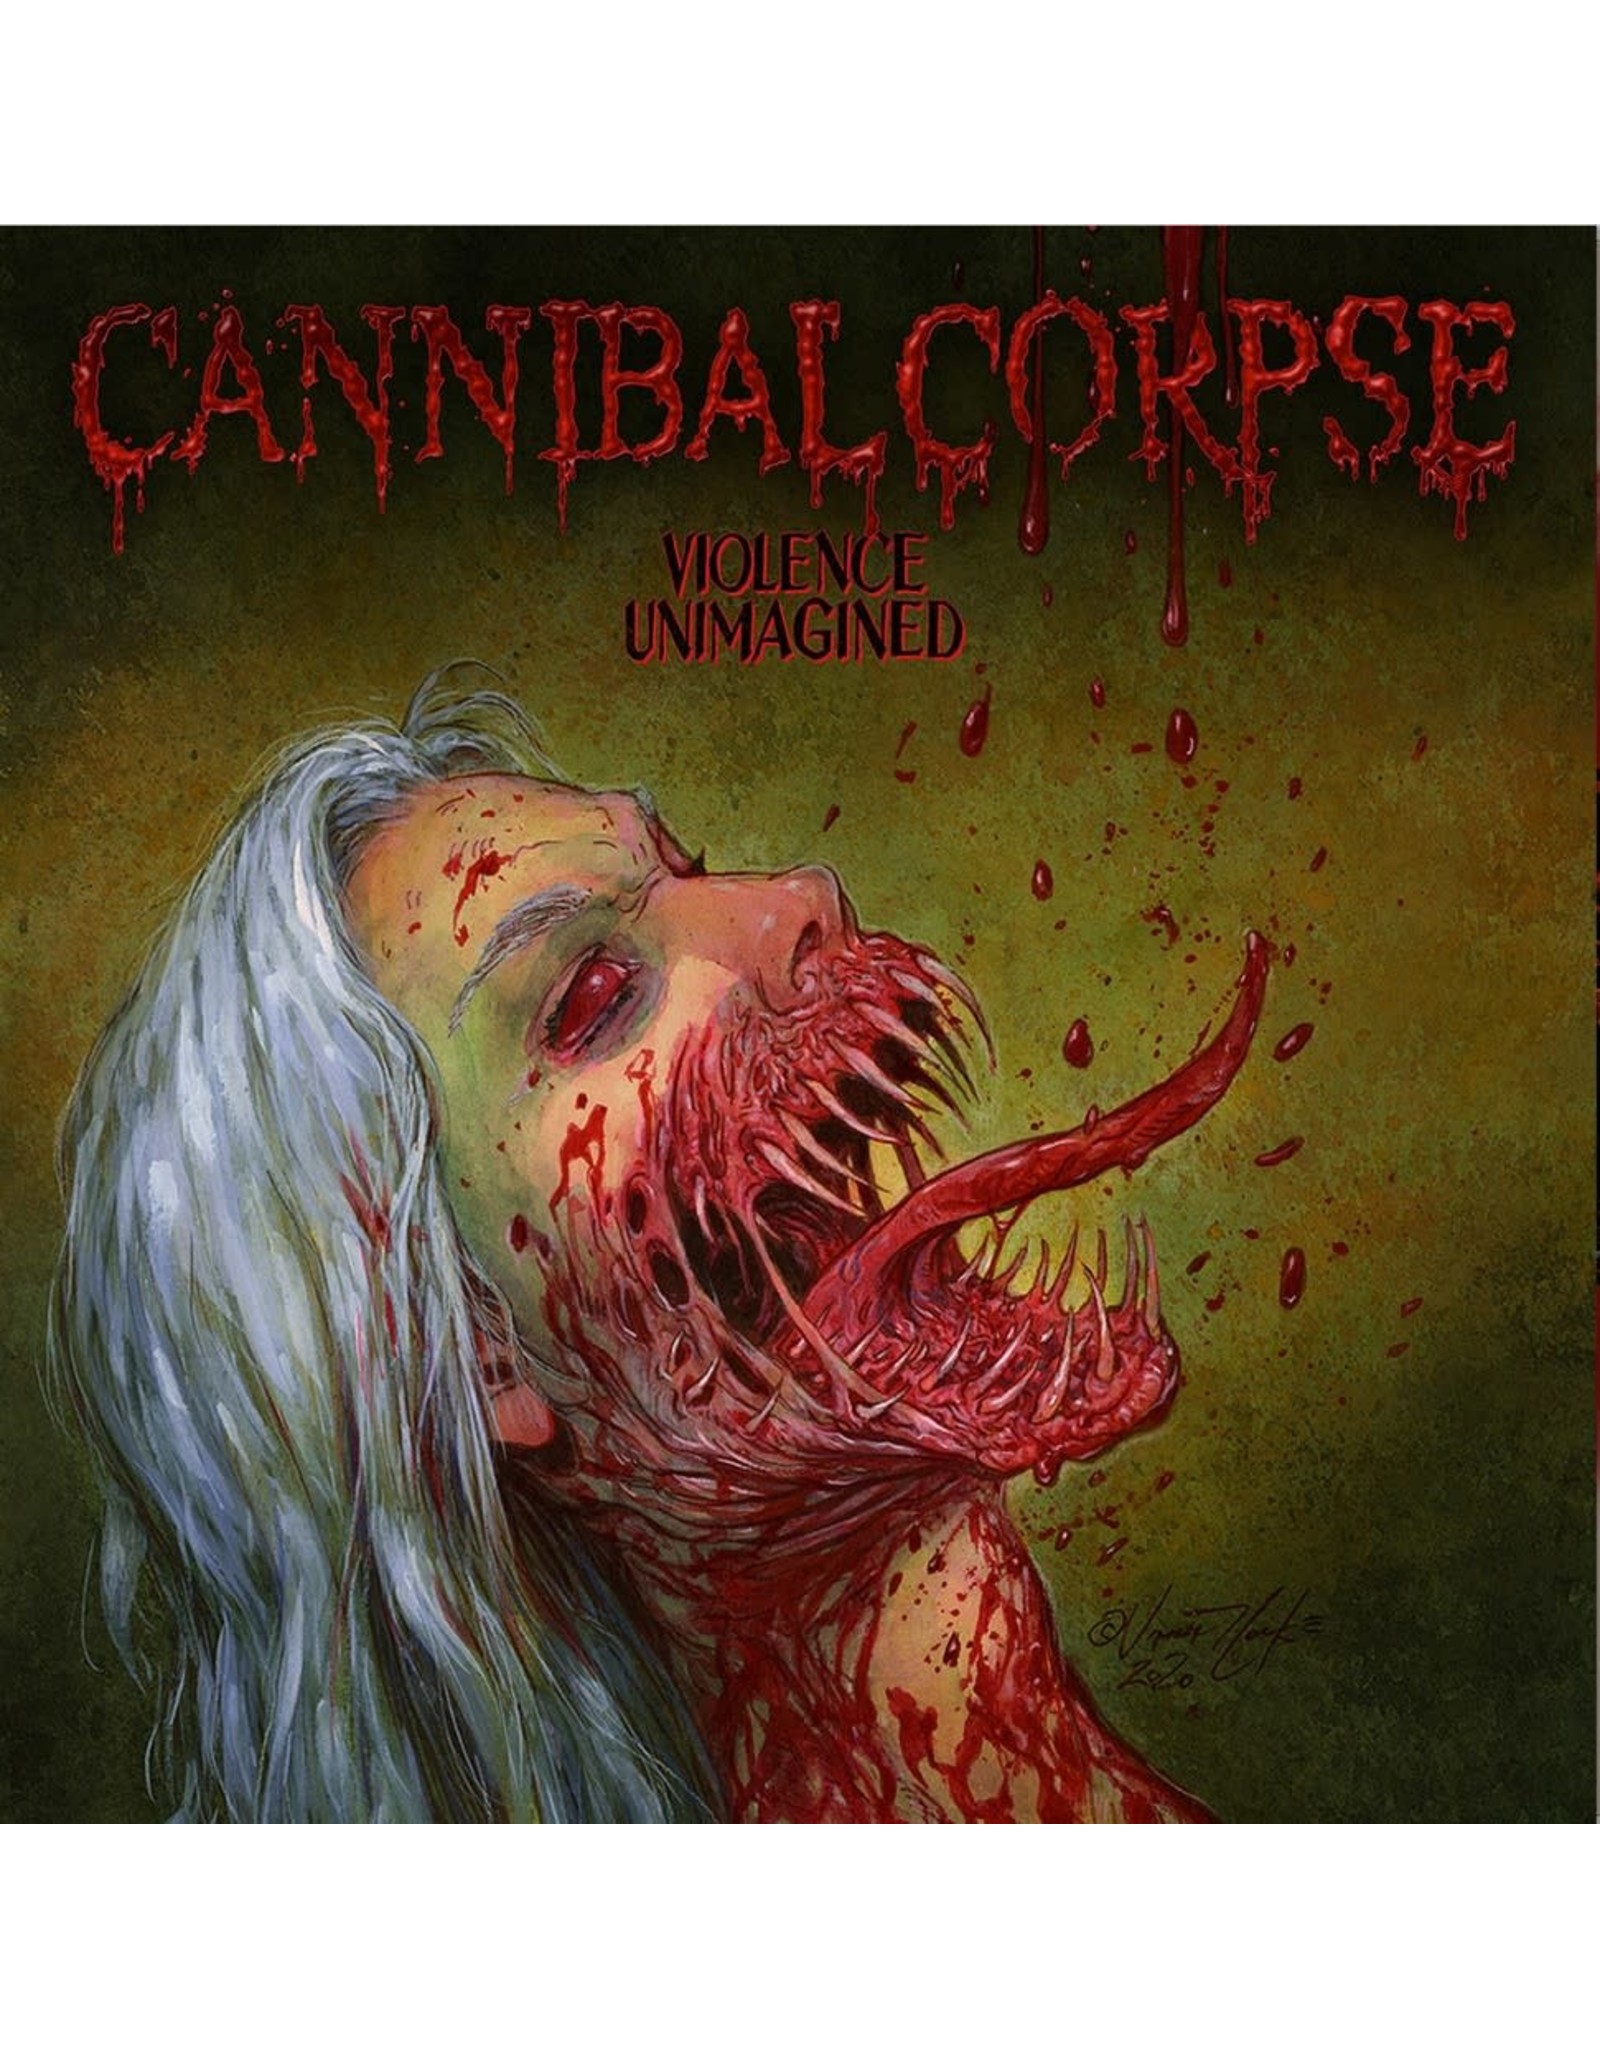 Cannibal Corpse - Violence Unimagined (Clear / Blue Vinyl)